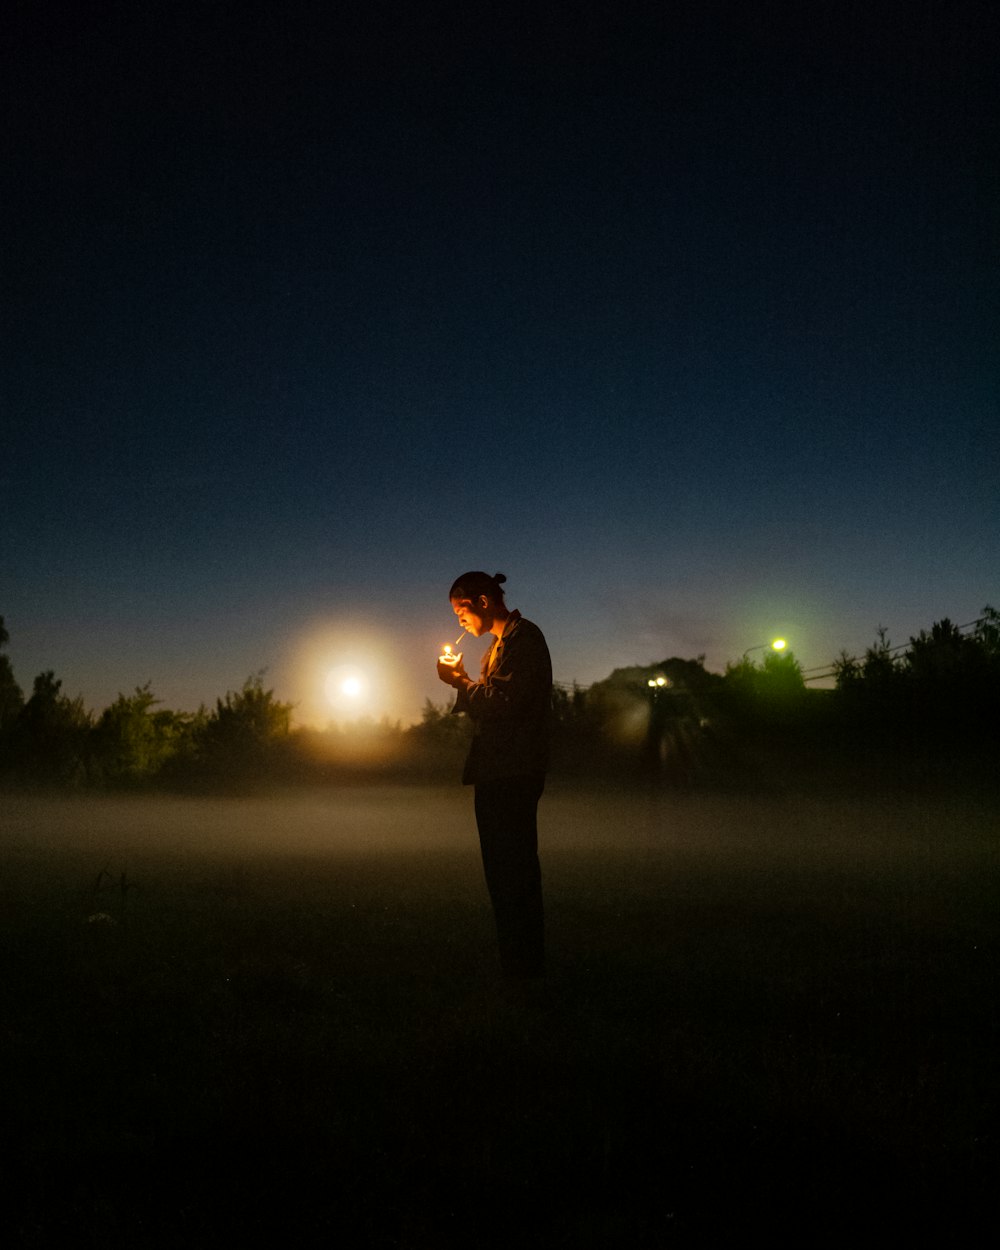 man in black jacket standing on green grass field during night time